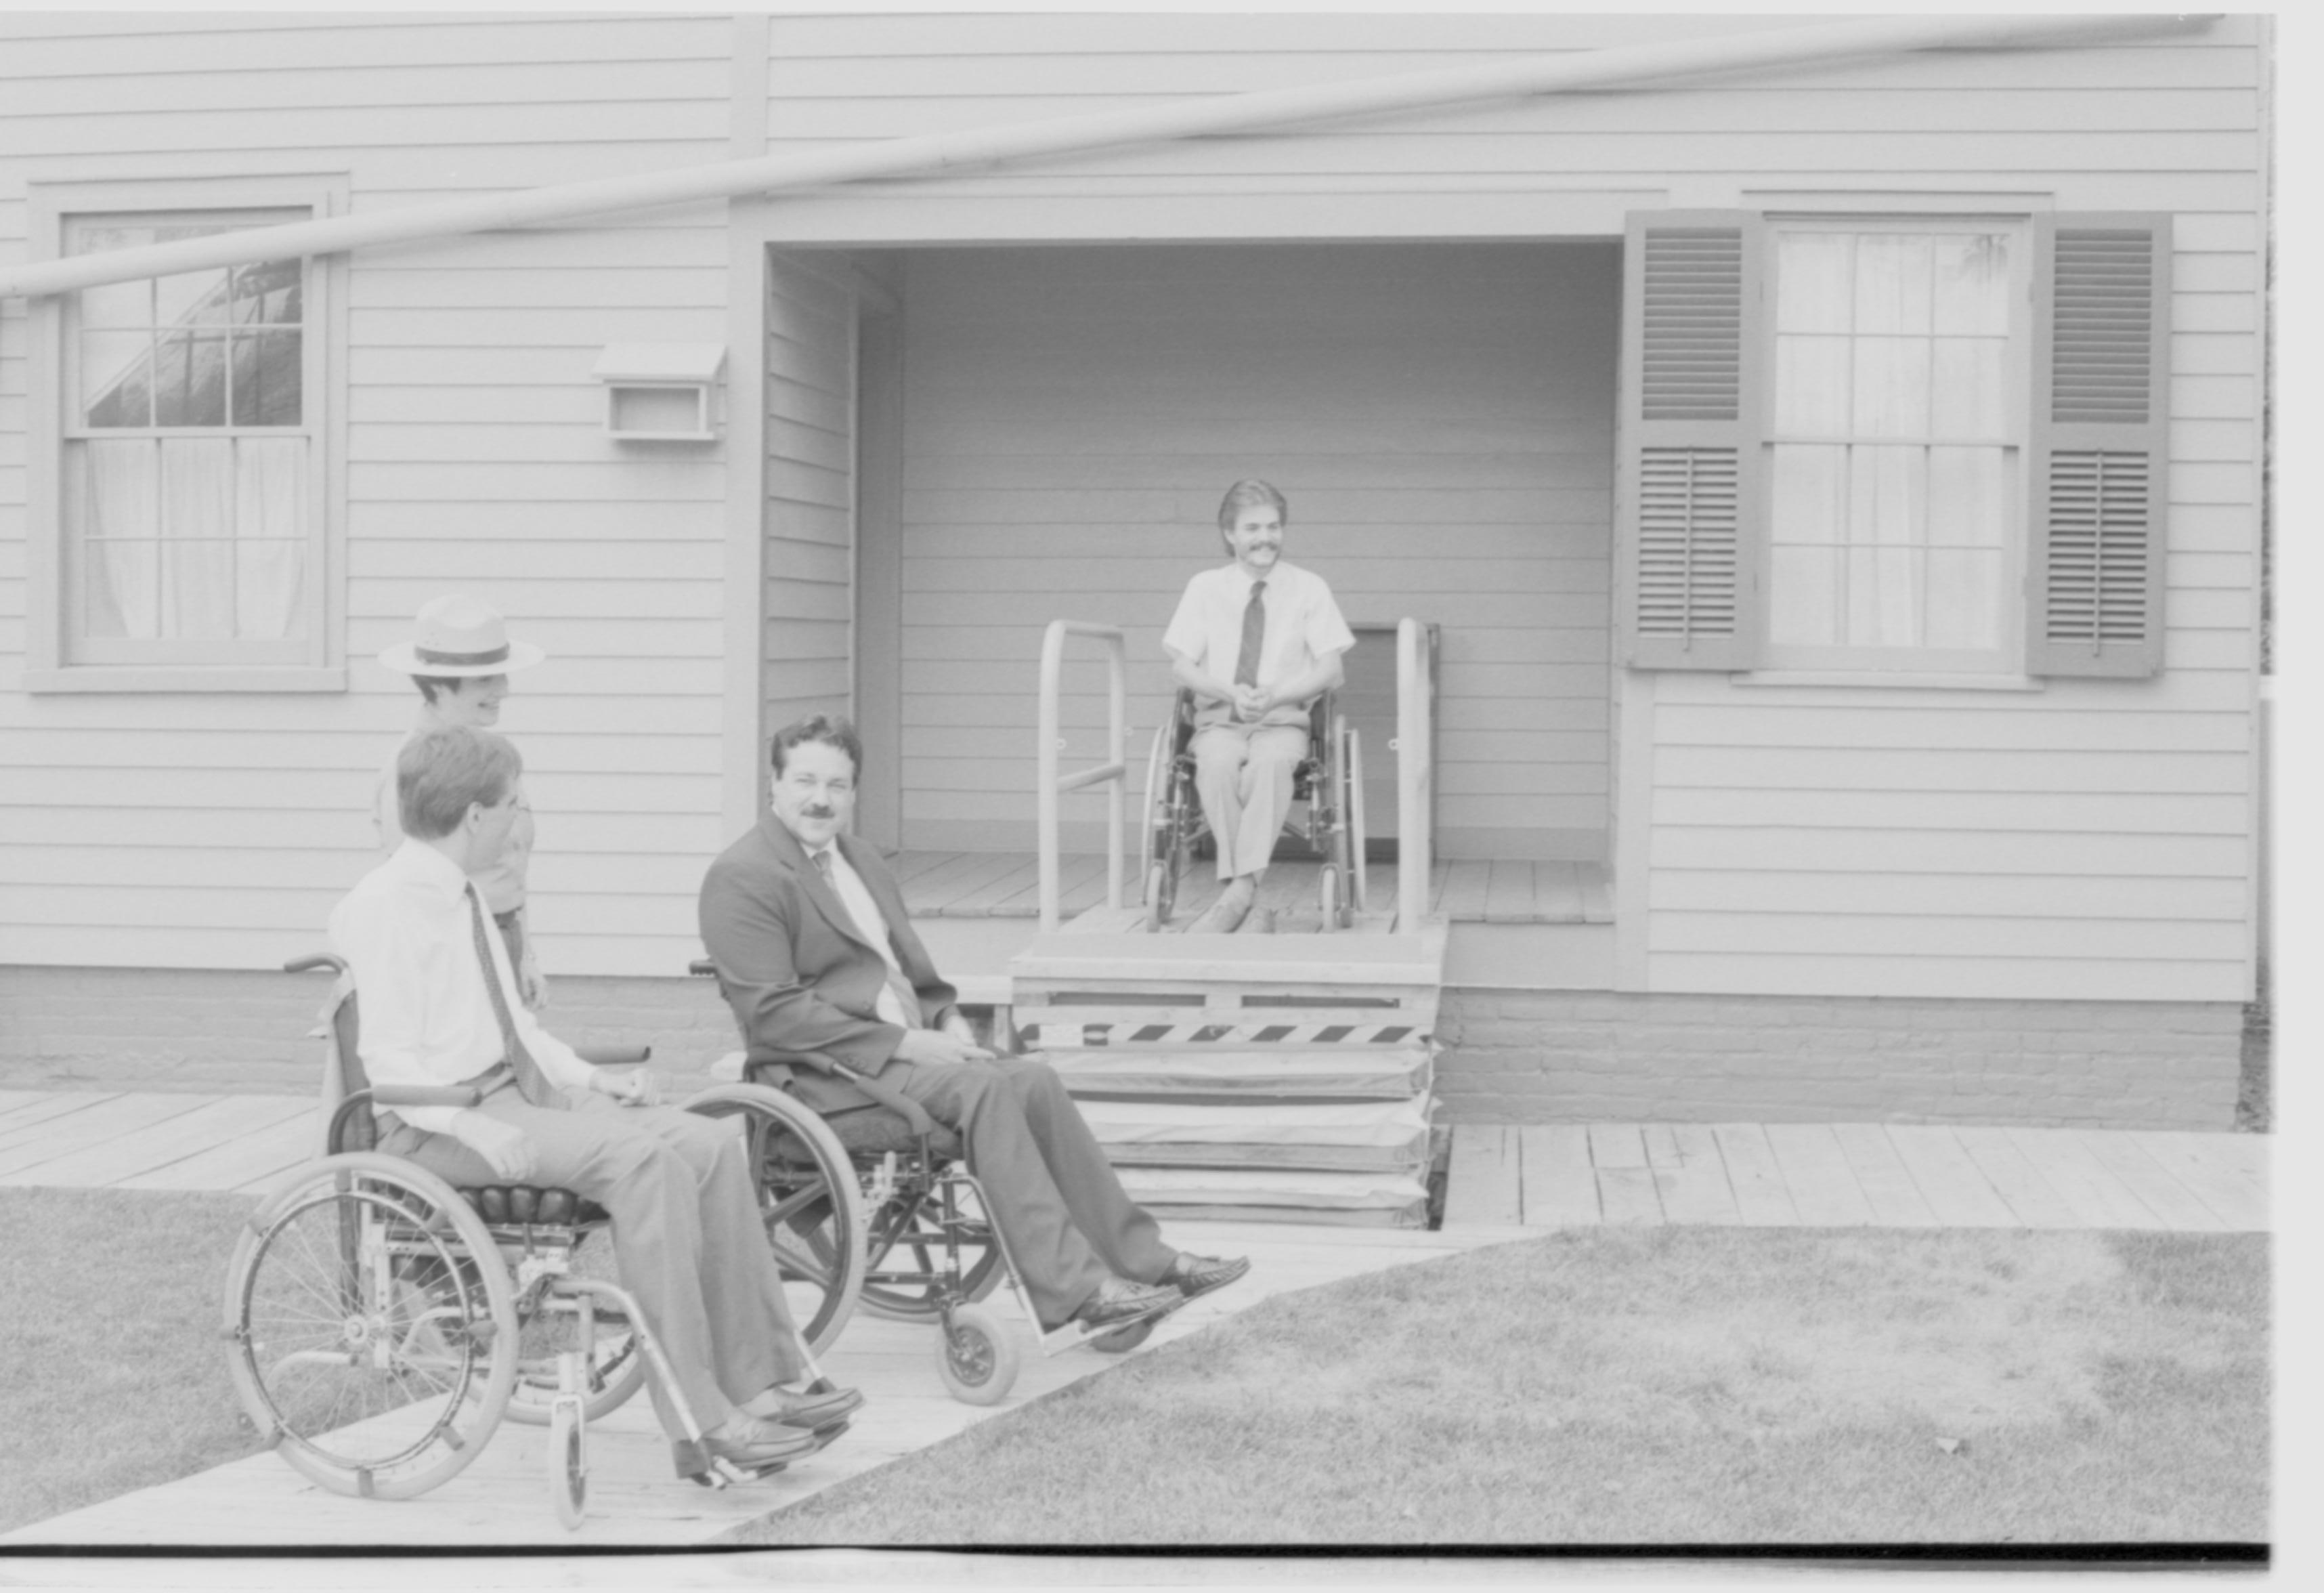 Lincoln Home wheelchair lift, at full height. One man in wheelchair on lift, facing away from Lincoln Home, with two other men in wheelchairs at ground level. Staff member Judith Winkelmann stands behind men at ground level. Photographer facing west.